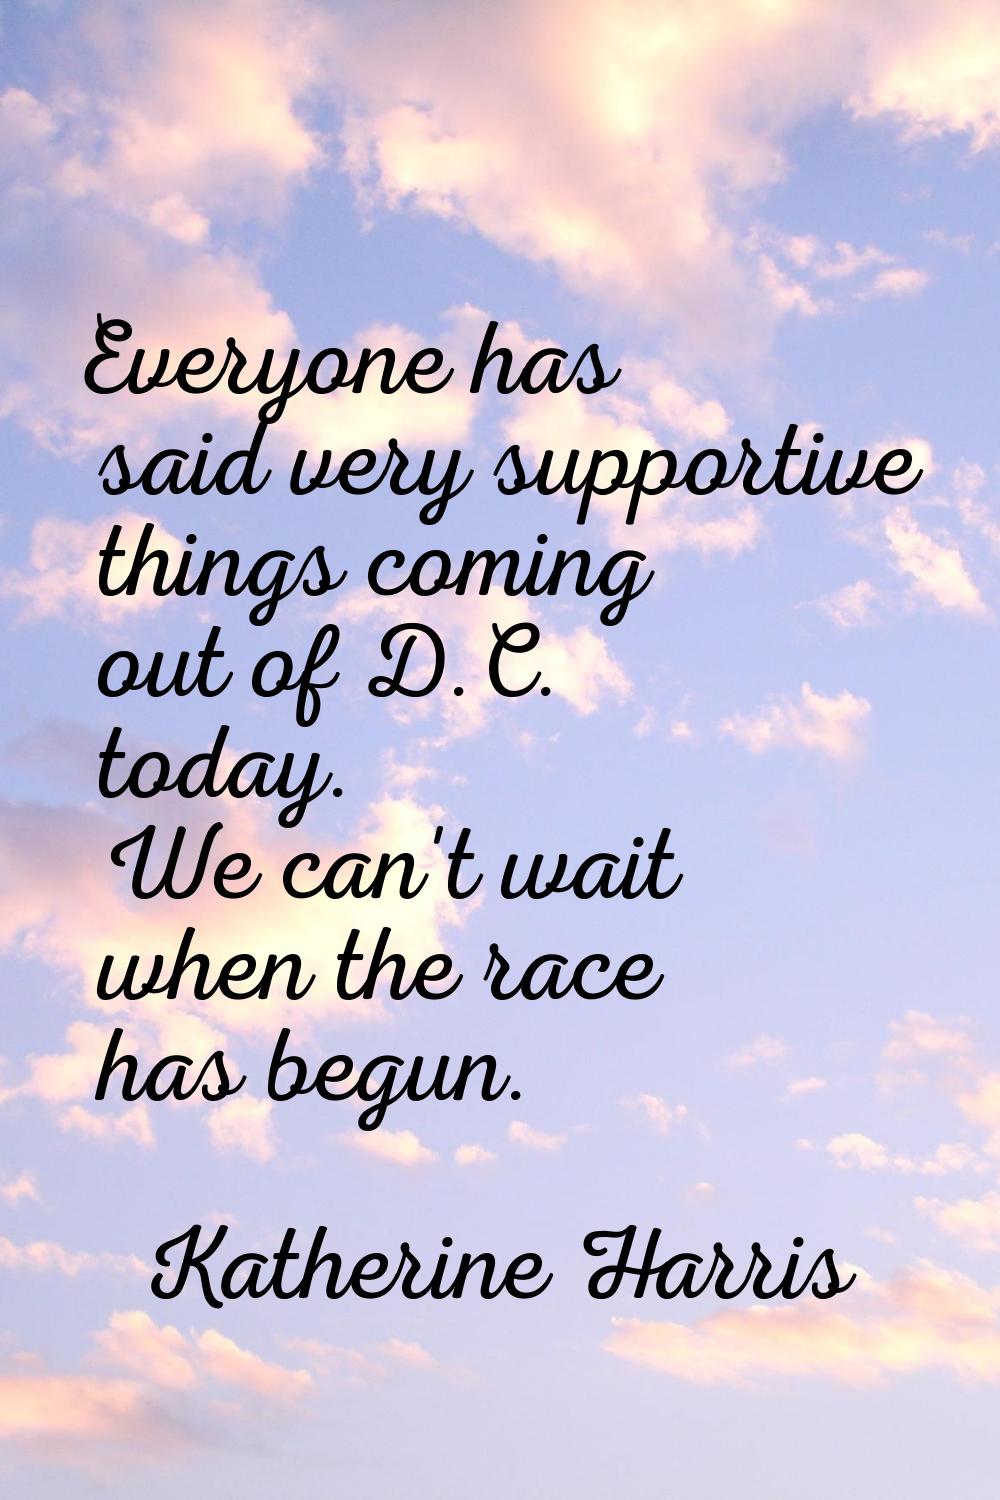 Everyone has said very supportive things coming out of D.C. today. We can't wait when the race has 